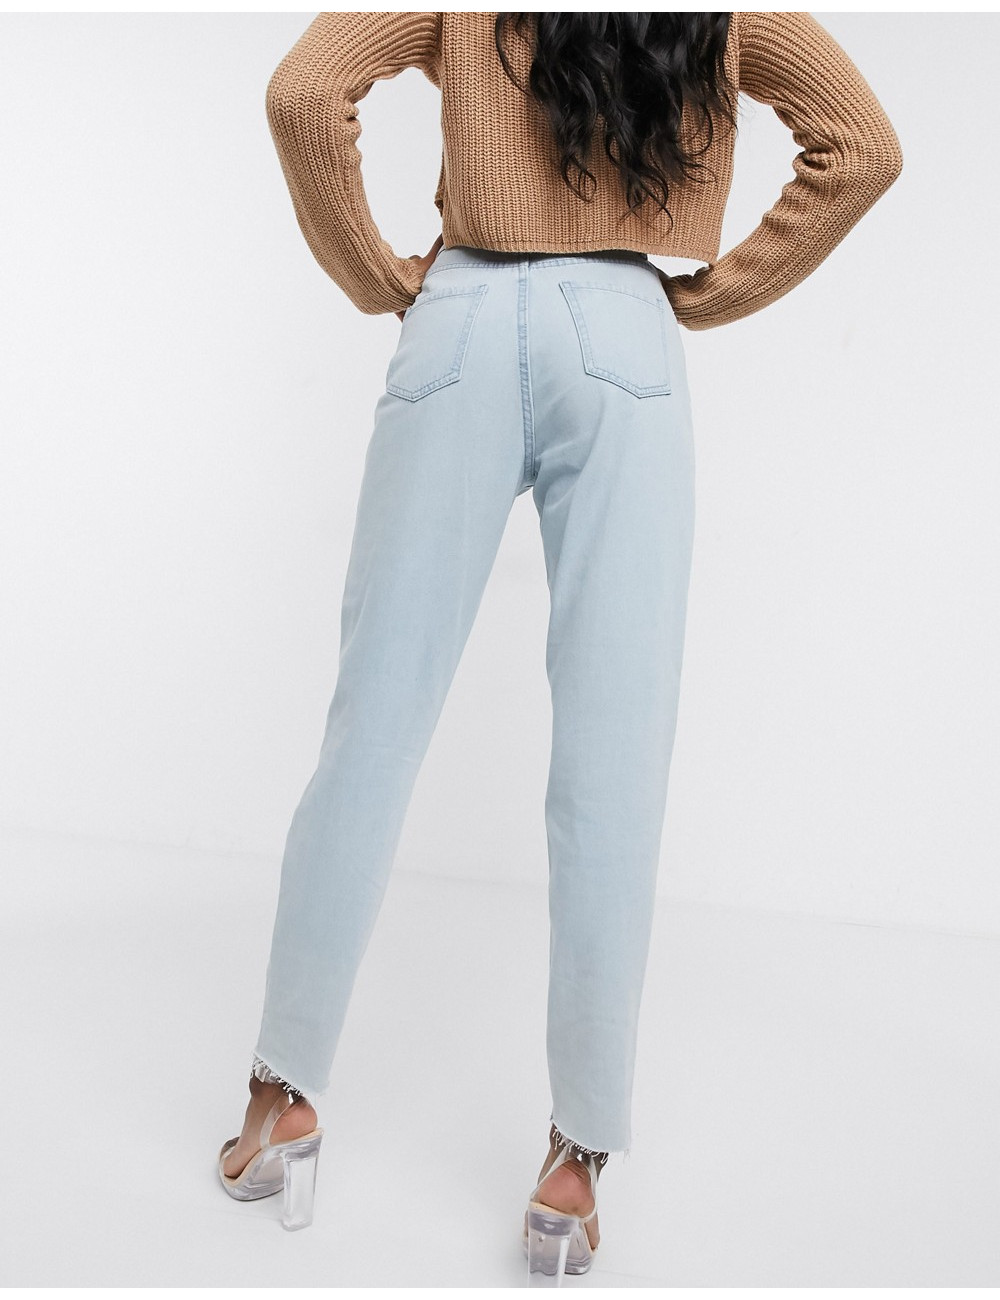 Missguided Tall mom jeans...